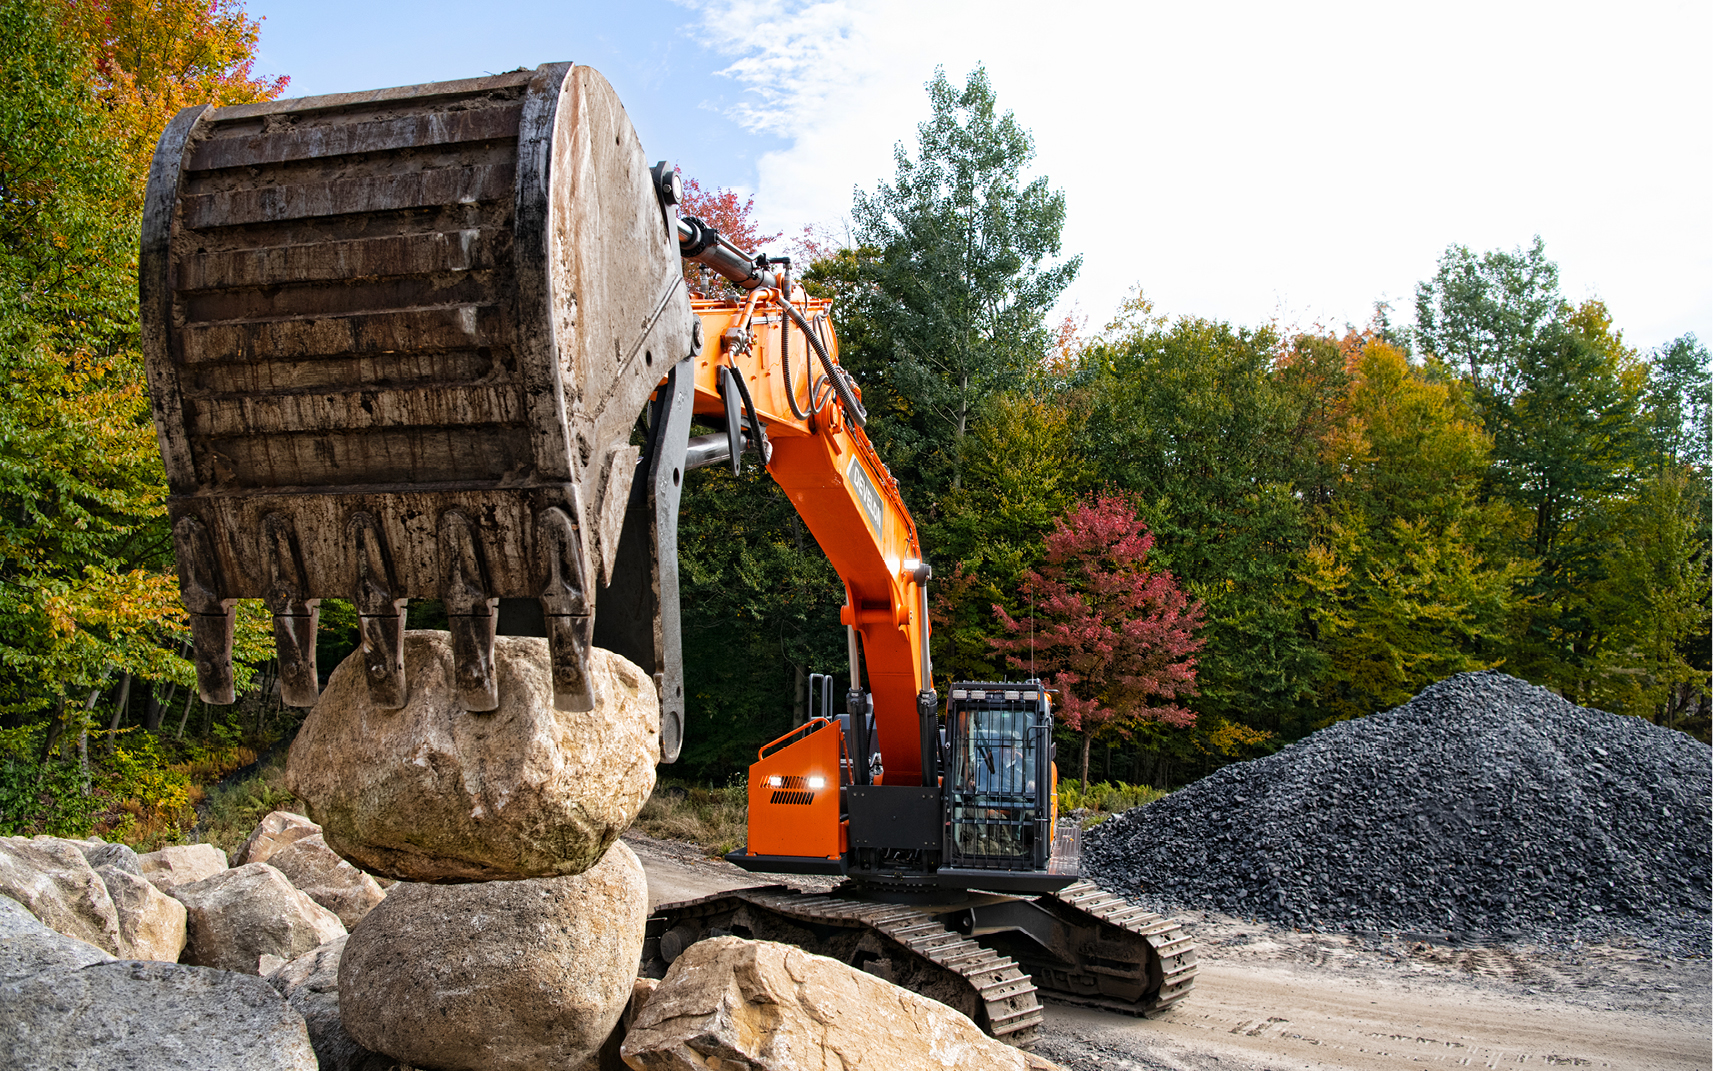 A DEVELON excavator lifts a boulder using bucket and thumb attachments.